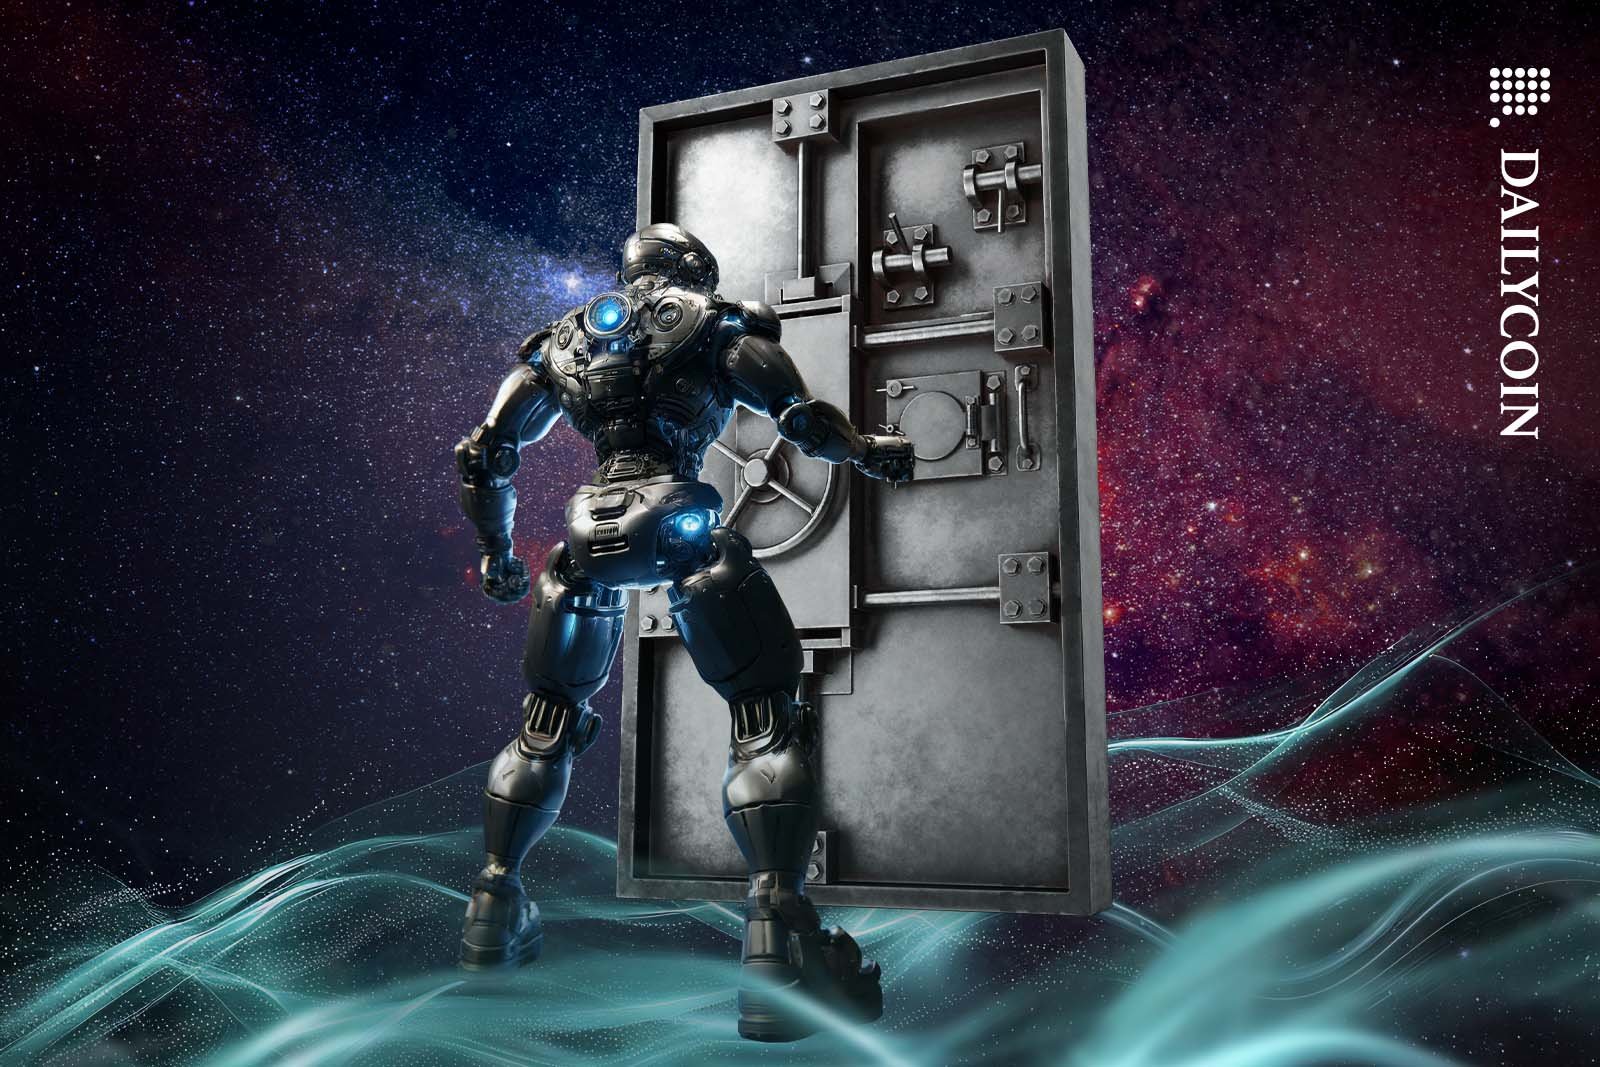 Robot knocking on a solid metal door in space.